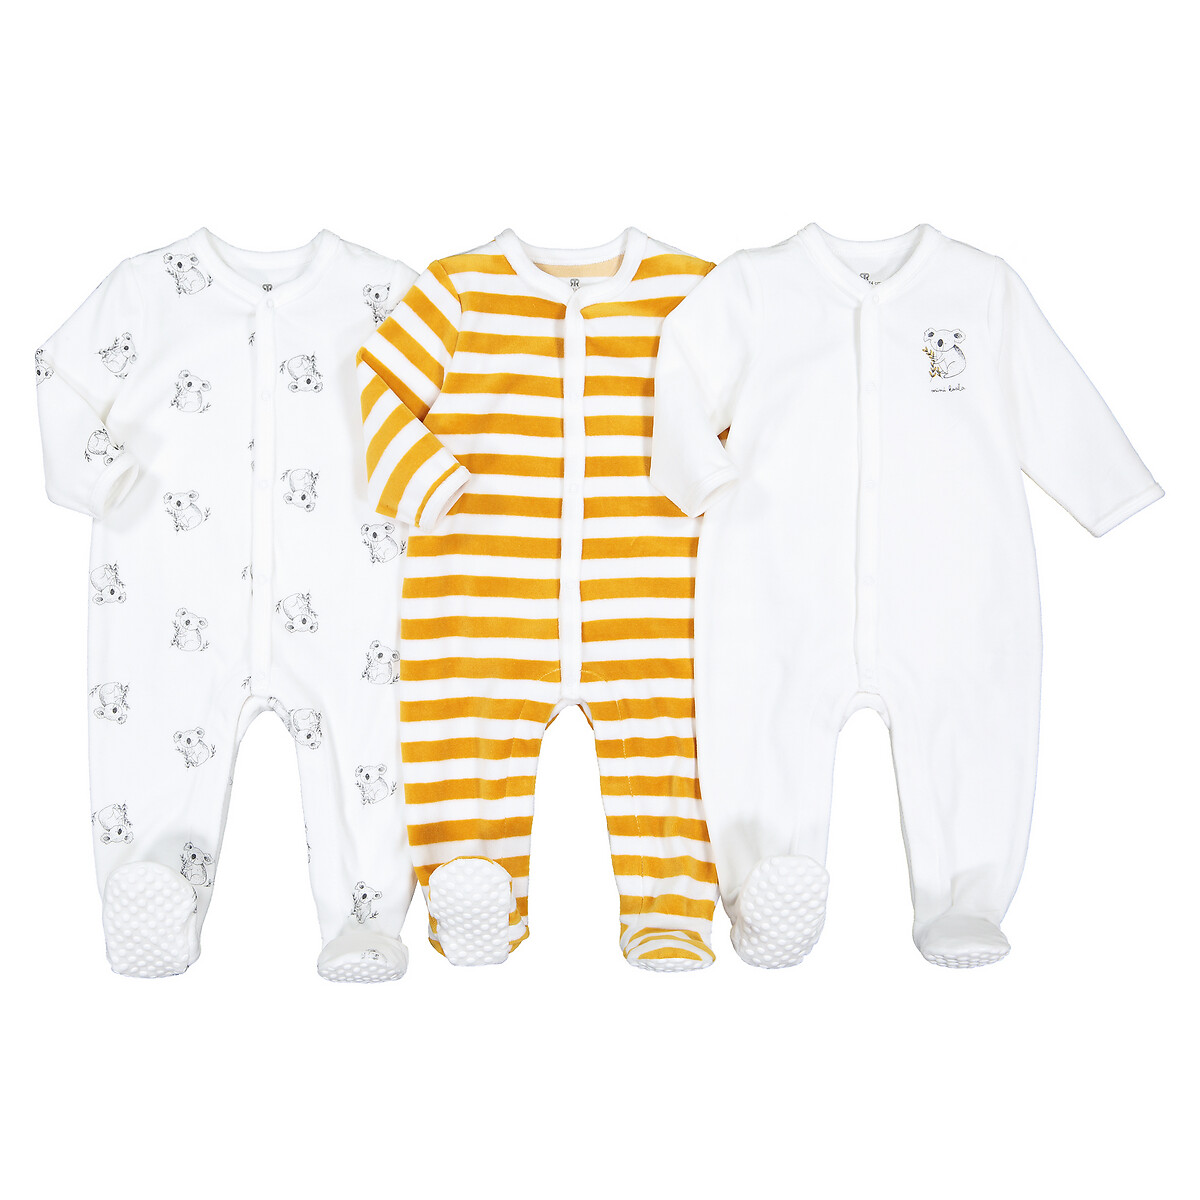 Baby Girls Pack of THREE Sleepsuits Fruit Designs NB up to 18-24M NEW in PACK 